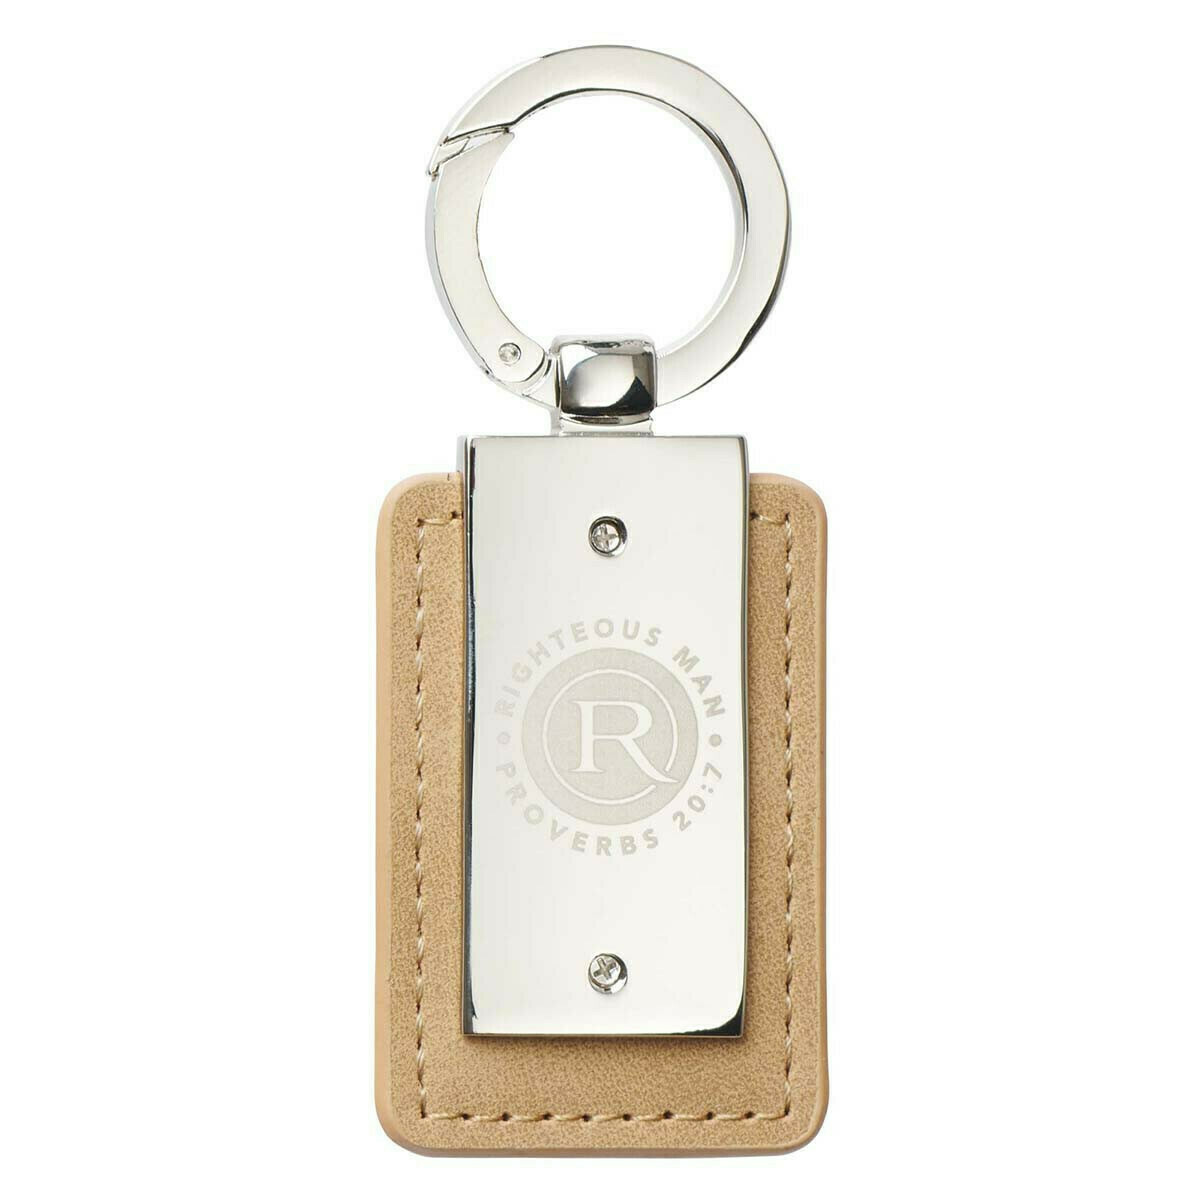 Righteous Man Keyring in Tin - Proverbs 20:7